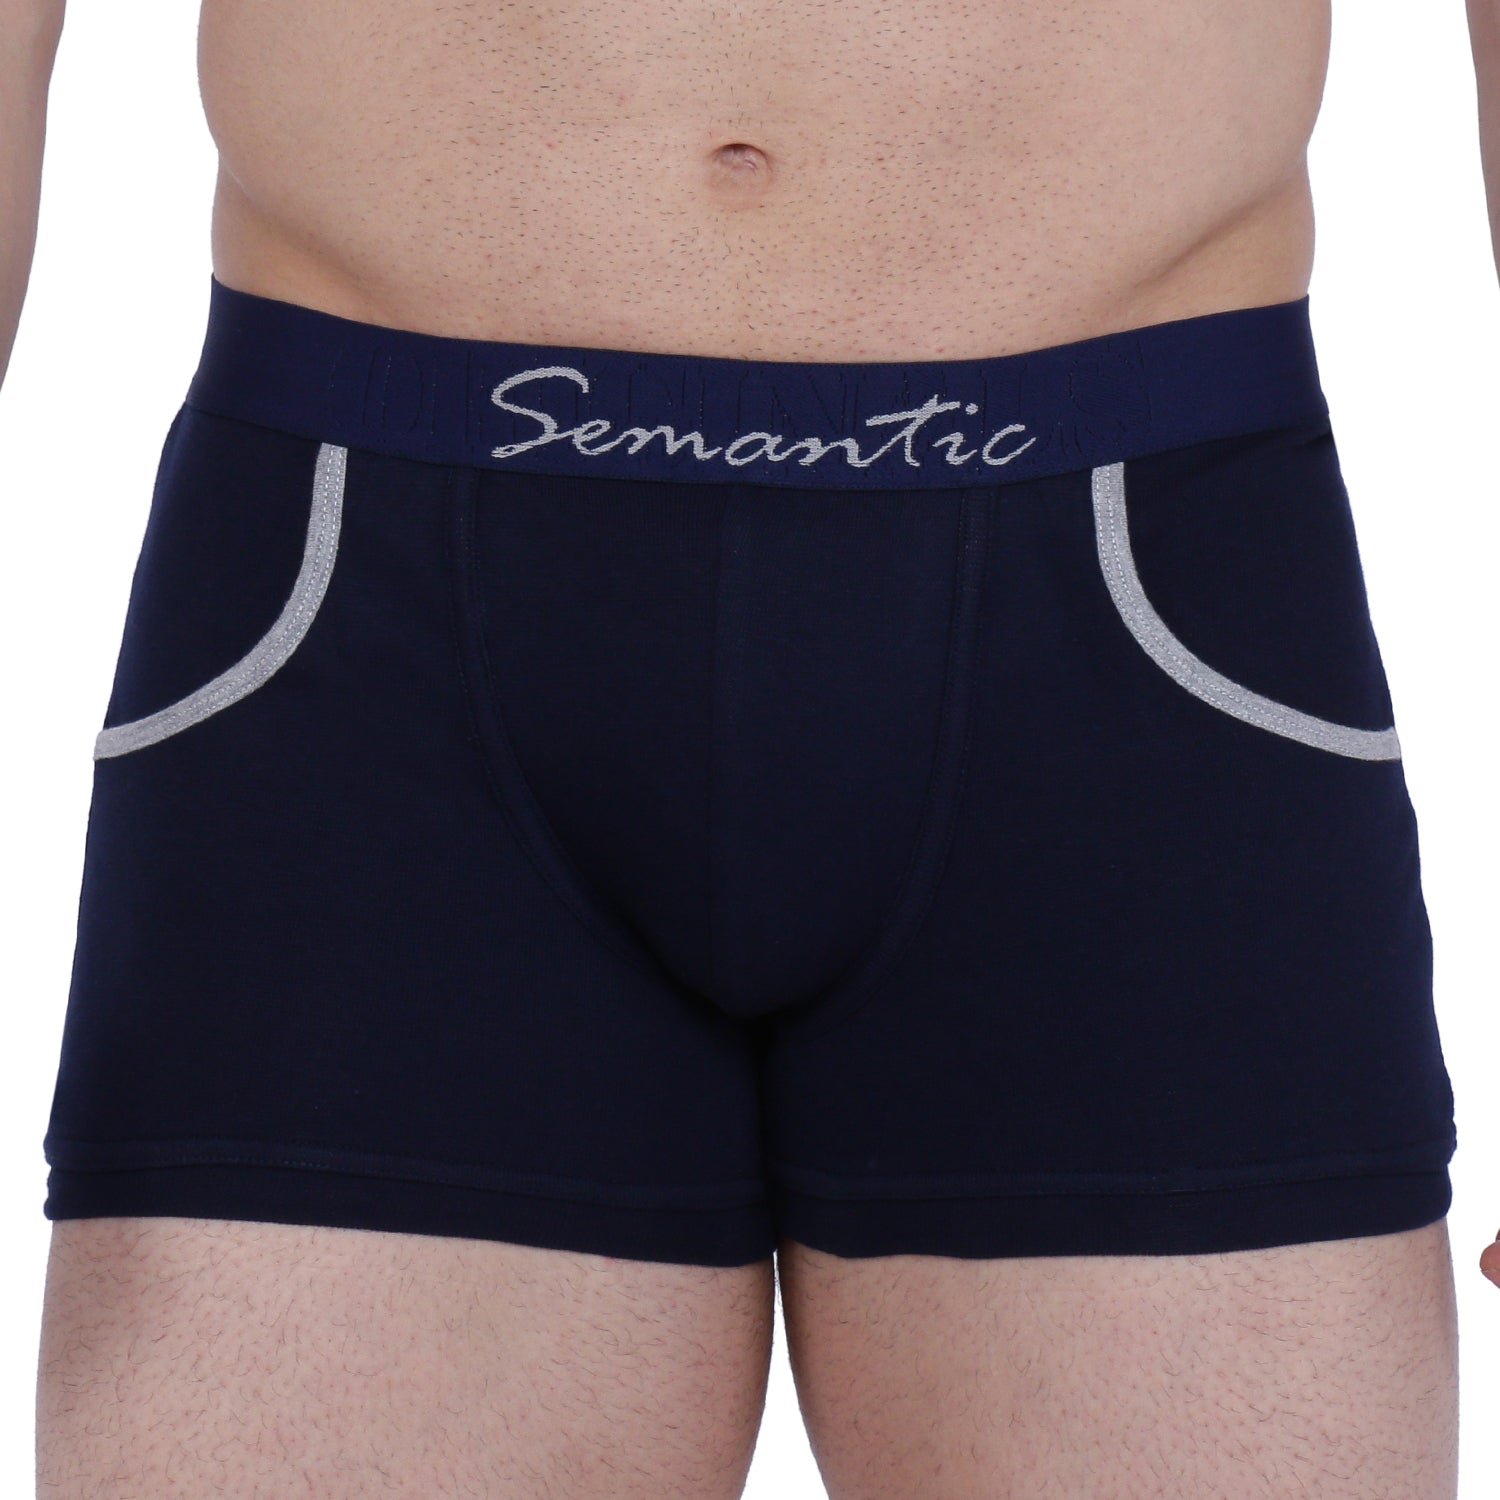 Semantic Cotton-Elastane Trunks with Pockets - Solid